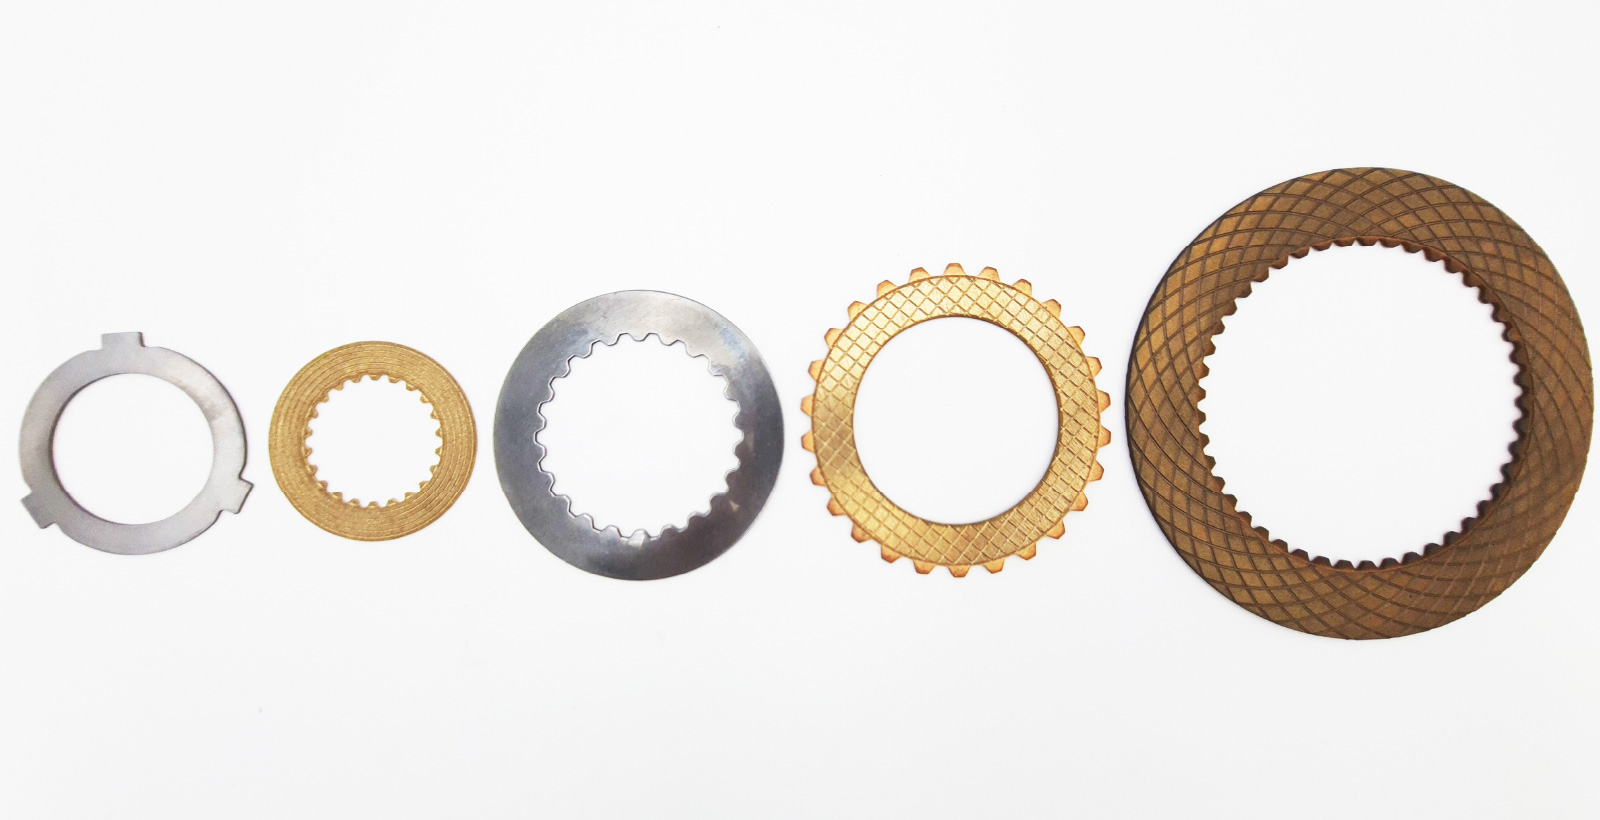 Bronze Transmission Discs for Aerospace Industry